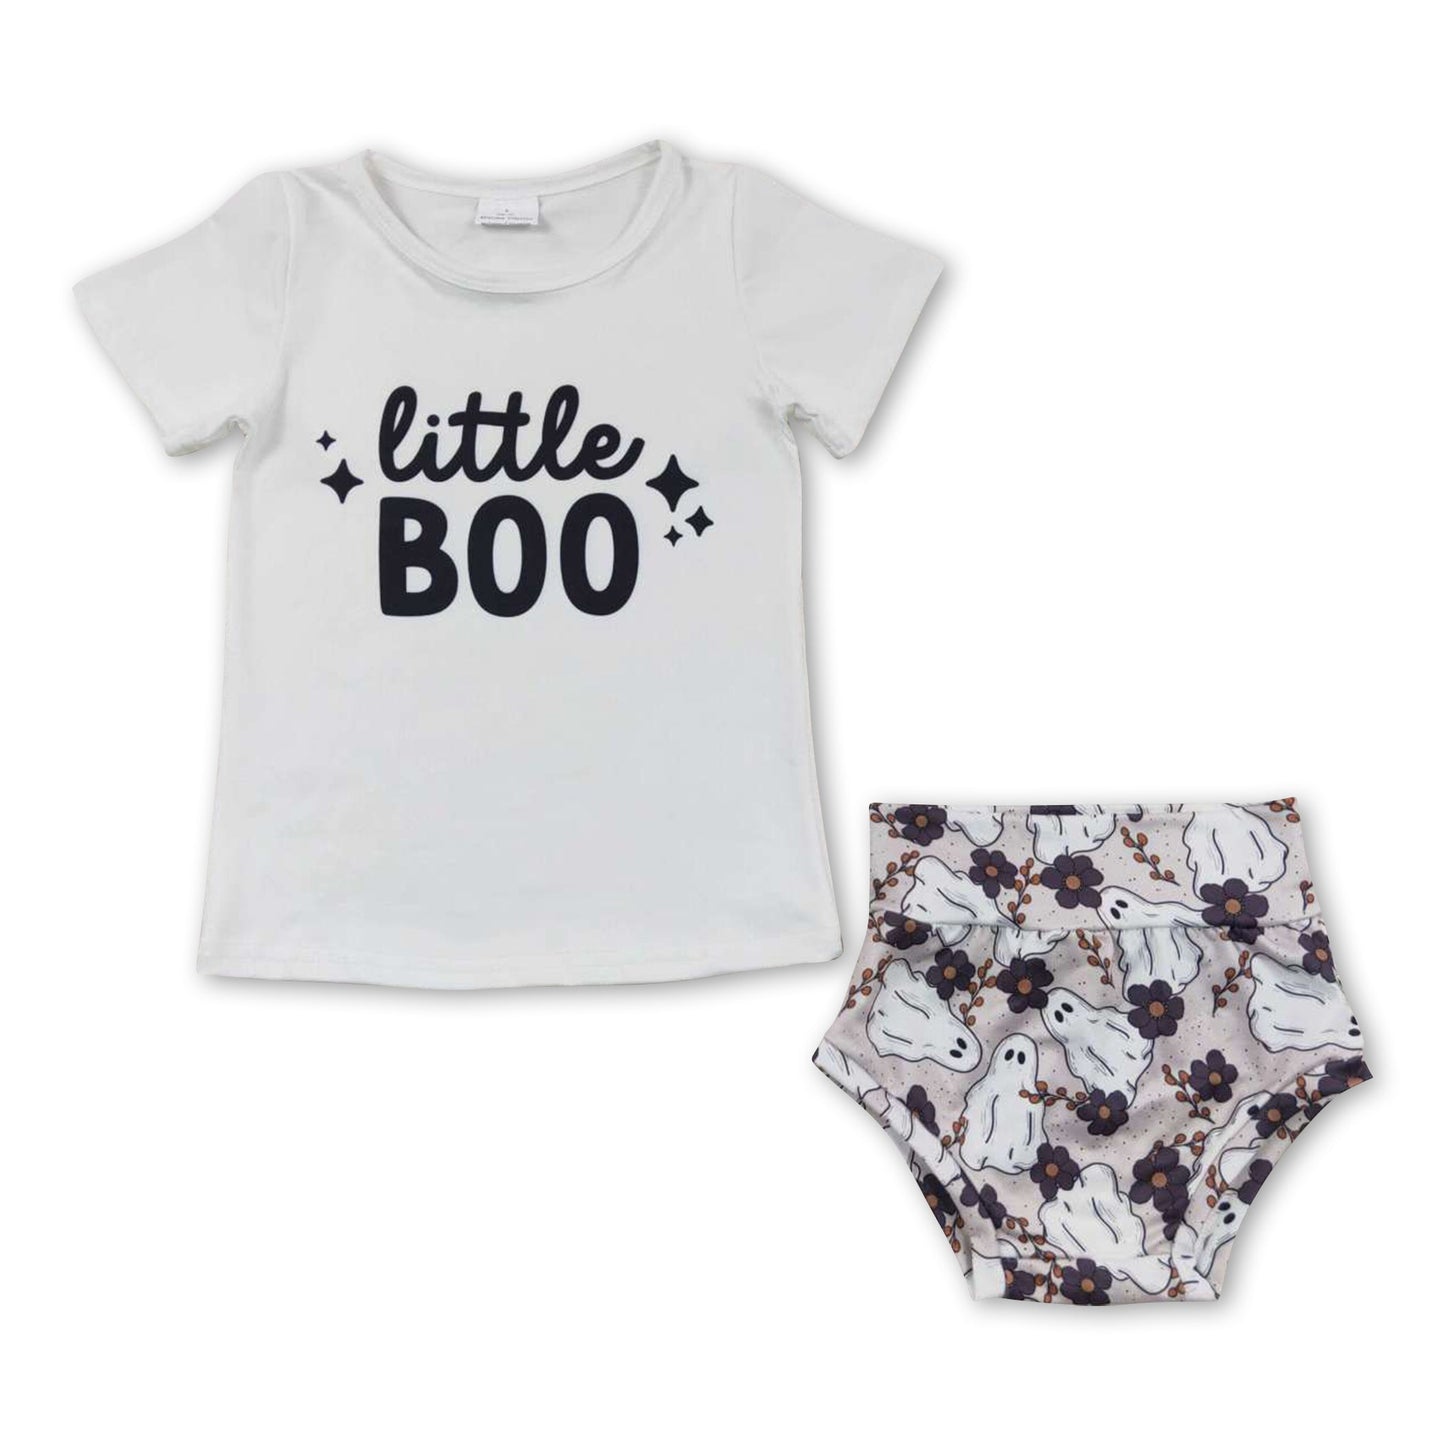 Little boo ghost floral bummies baby girls Halloween outfits